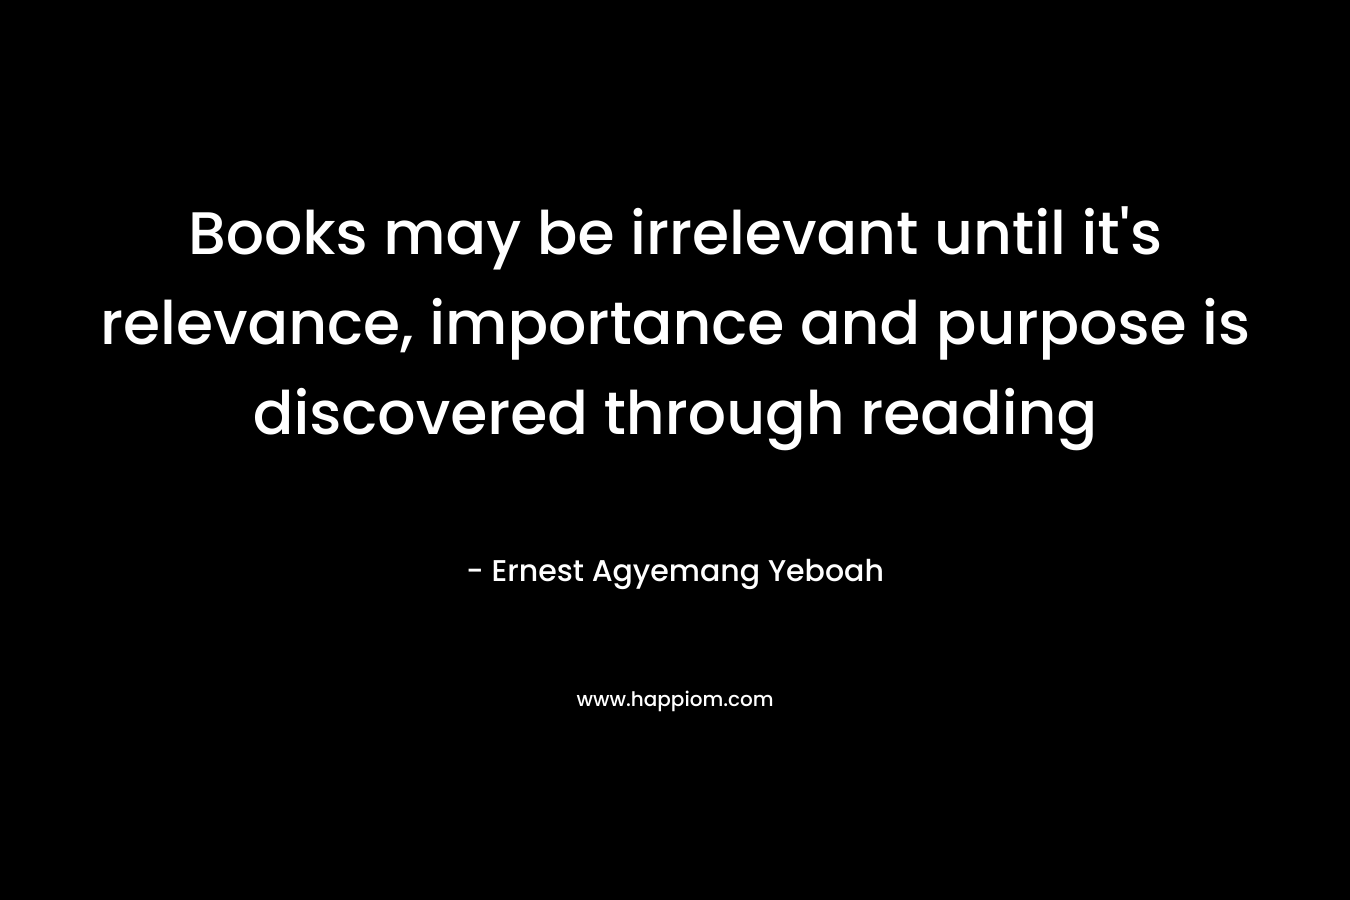 Books may be irrelevant until it’s relevance, importance and purpose is discovered through reading – Ernest Agyemang Yeboah